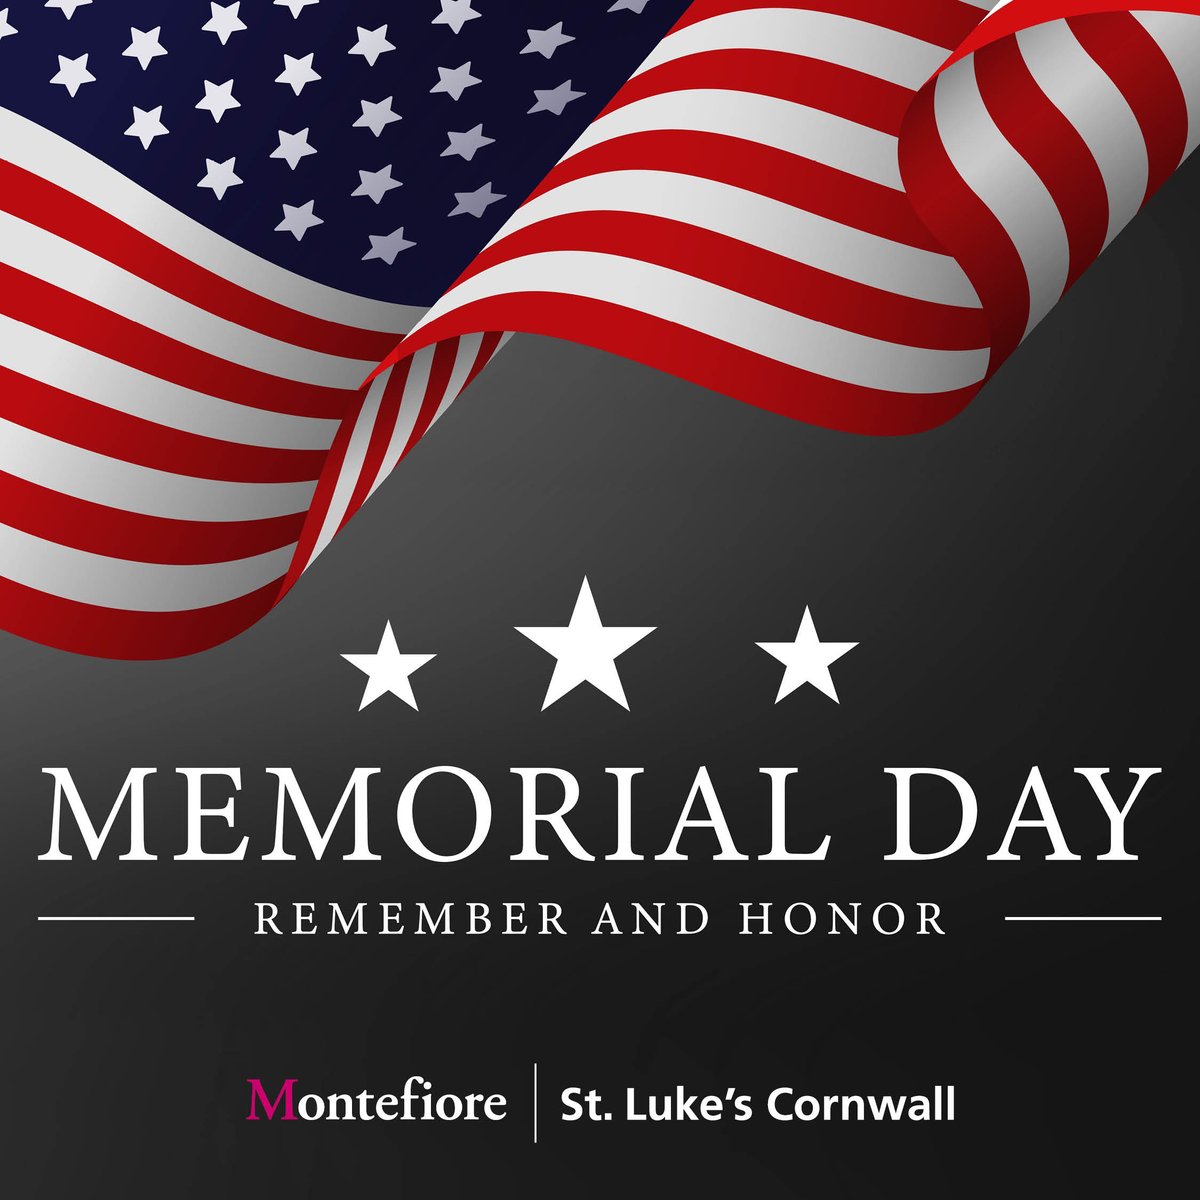 MSLC recognizes the courage and sacrifice of those who gave everything for our nation, today and every day.